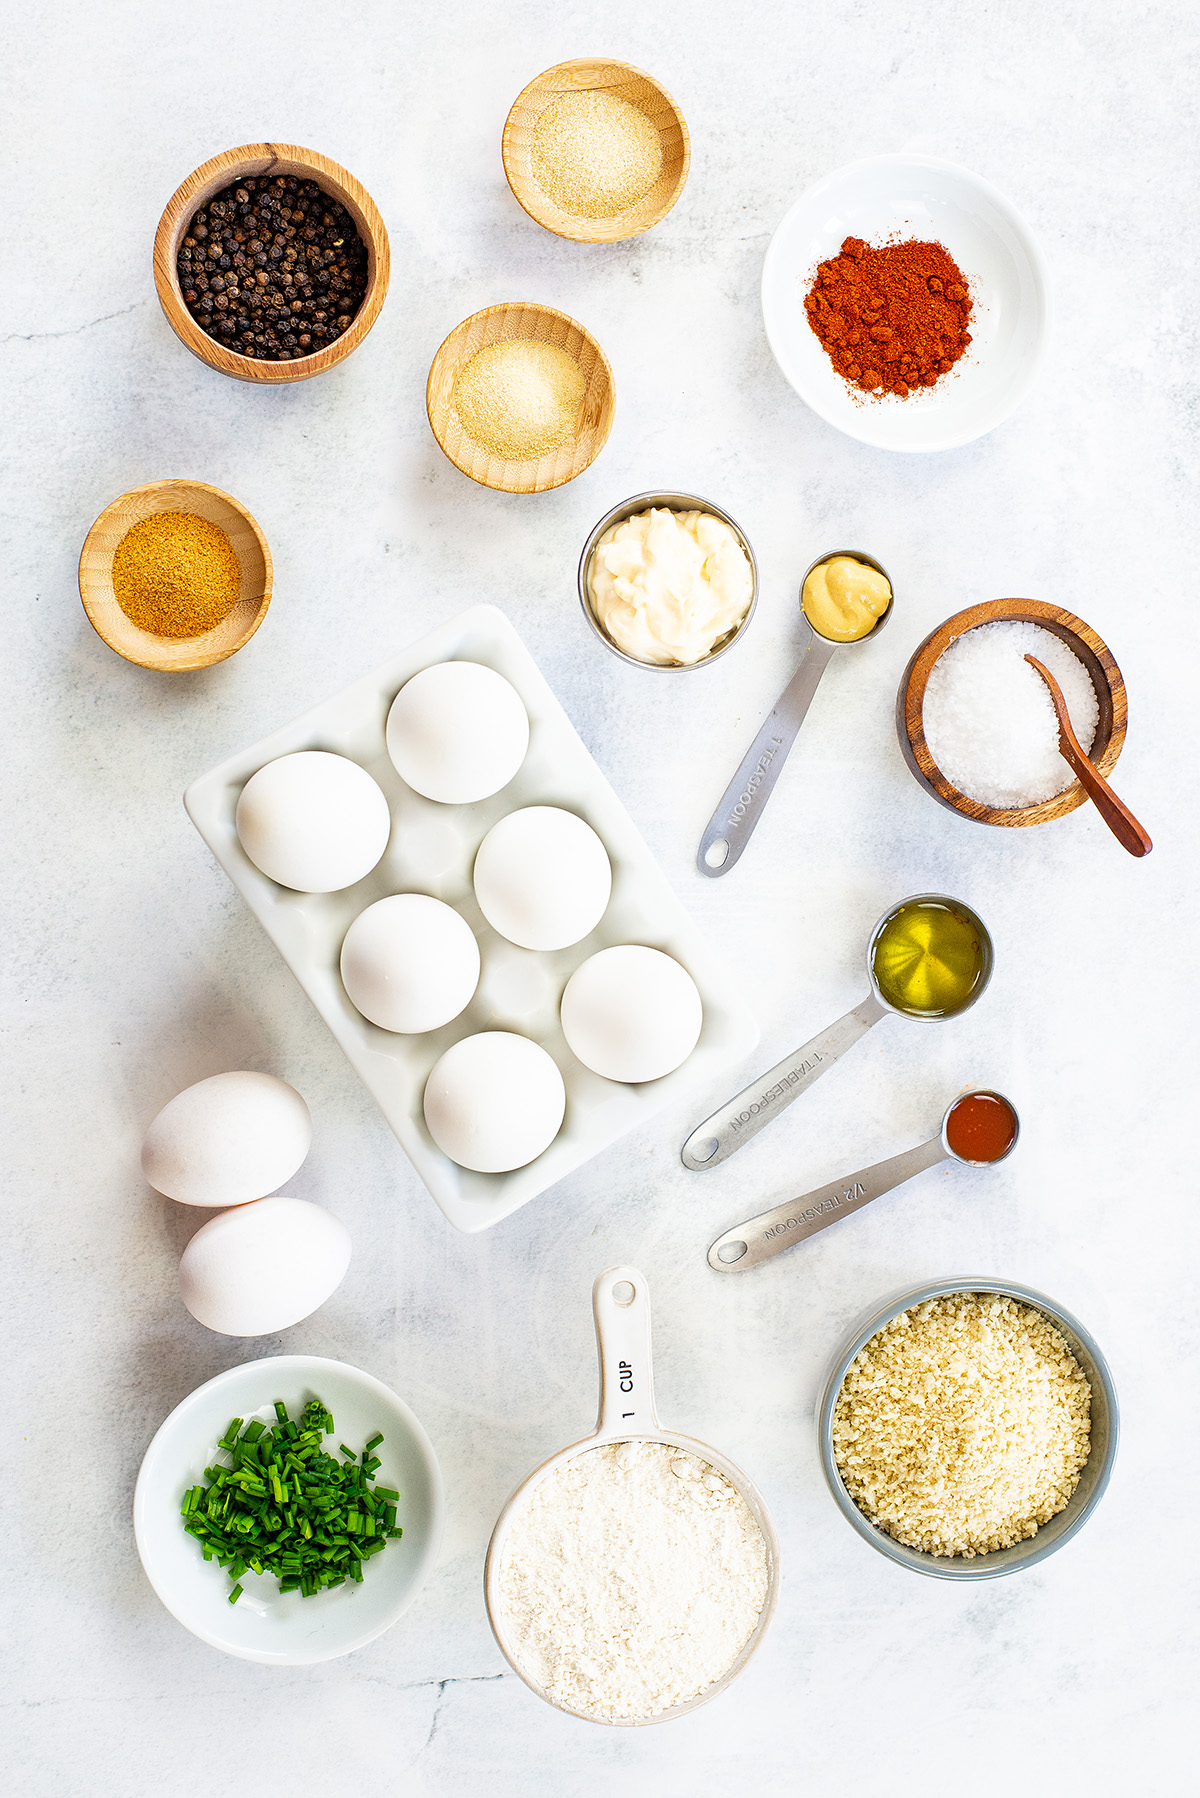 Fried deviled egg ingredients spread out on a white countertop.